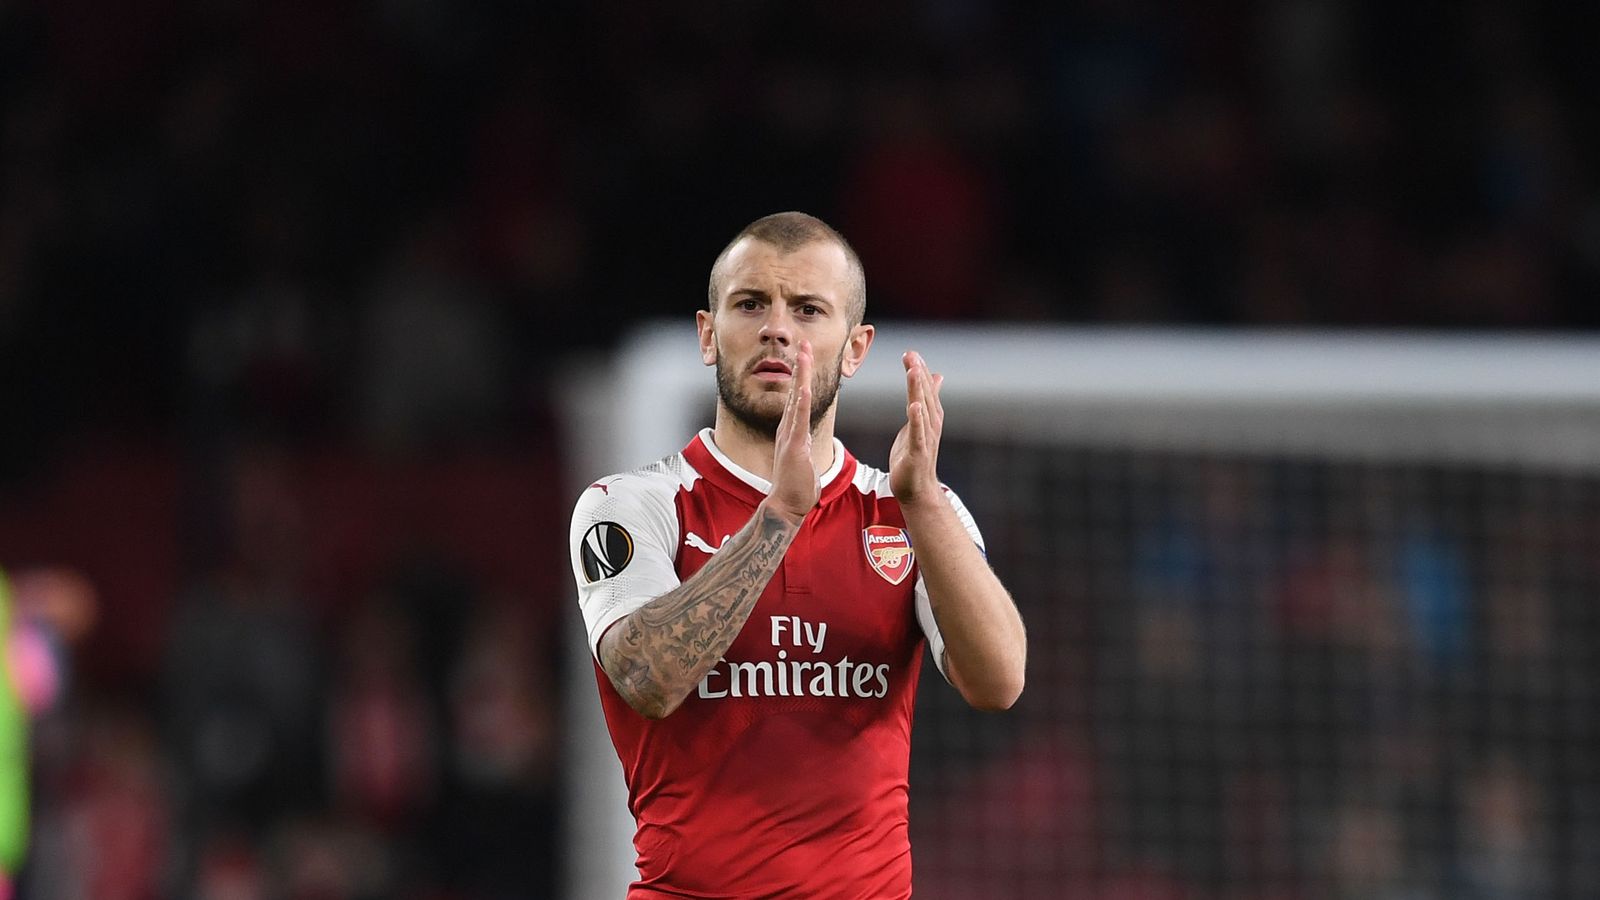 Jack Wilshere - TOP 10 football players with massive potential who faded away